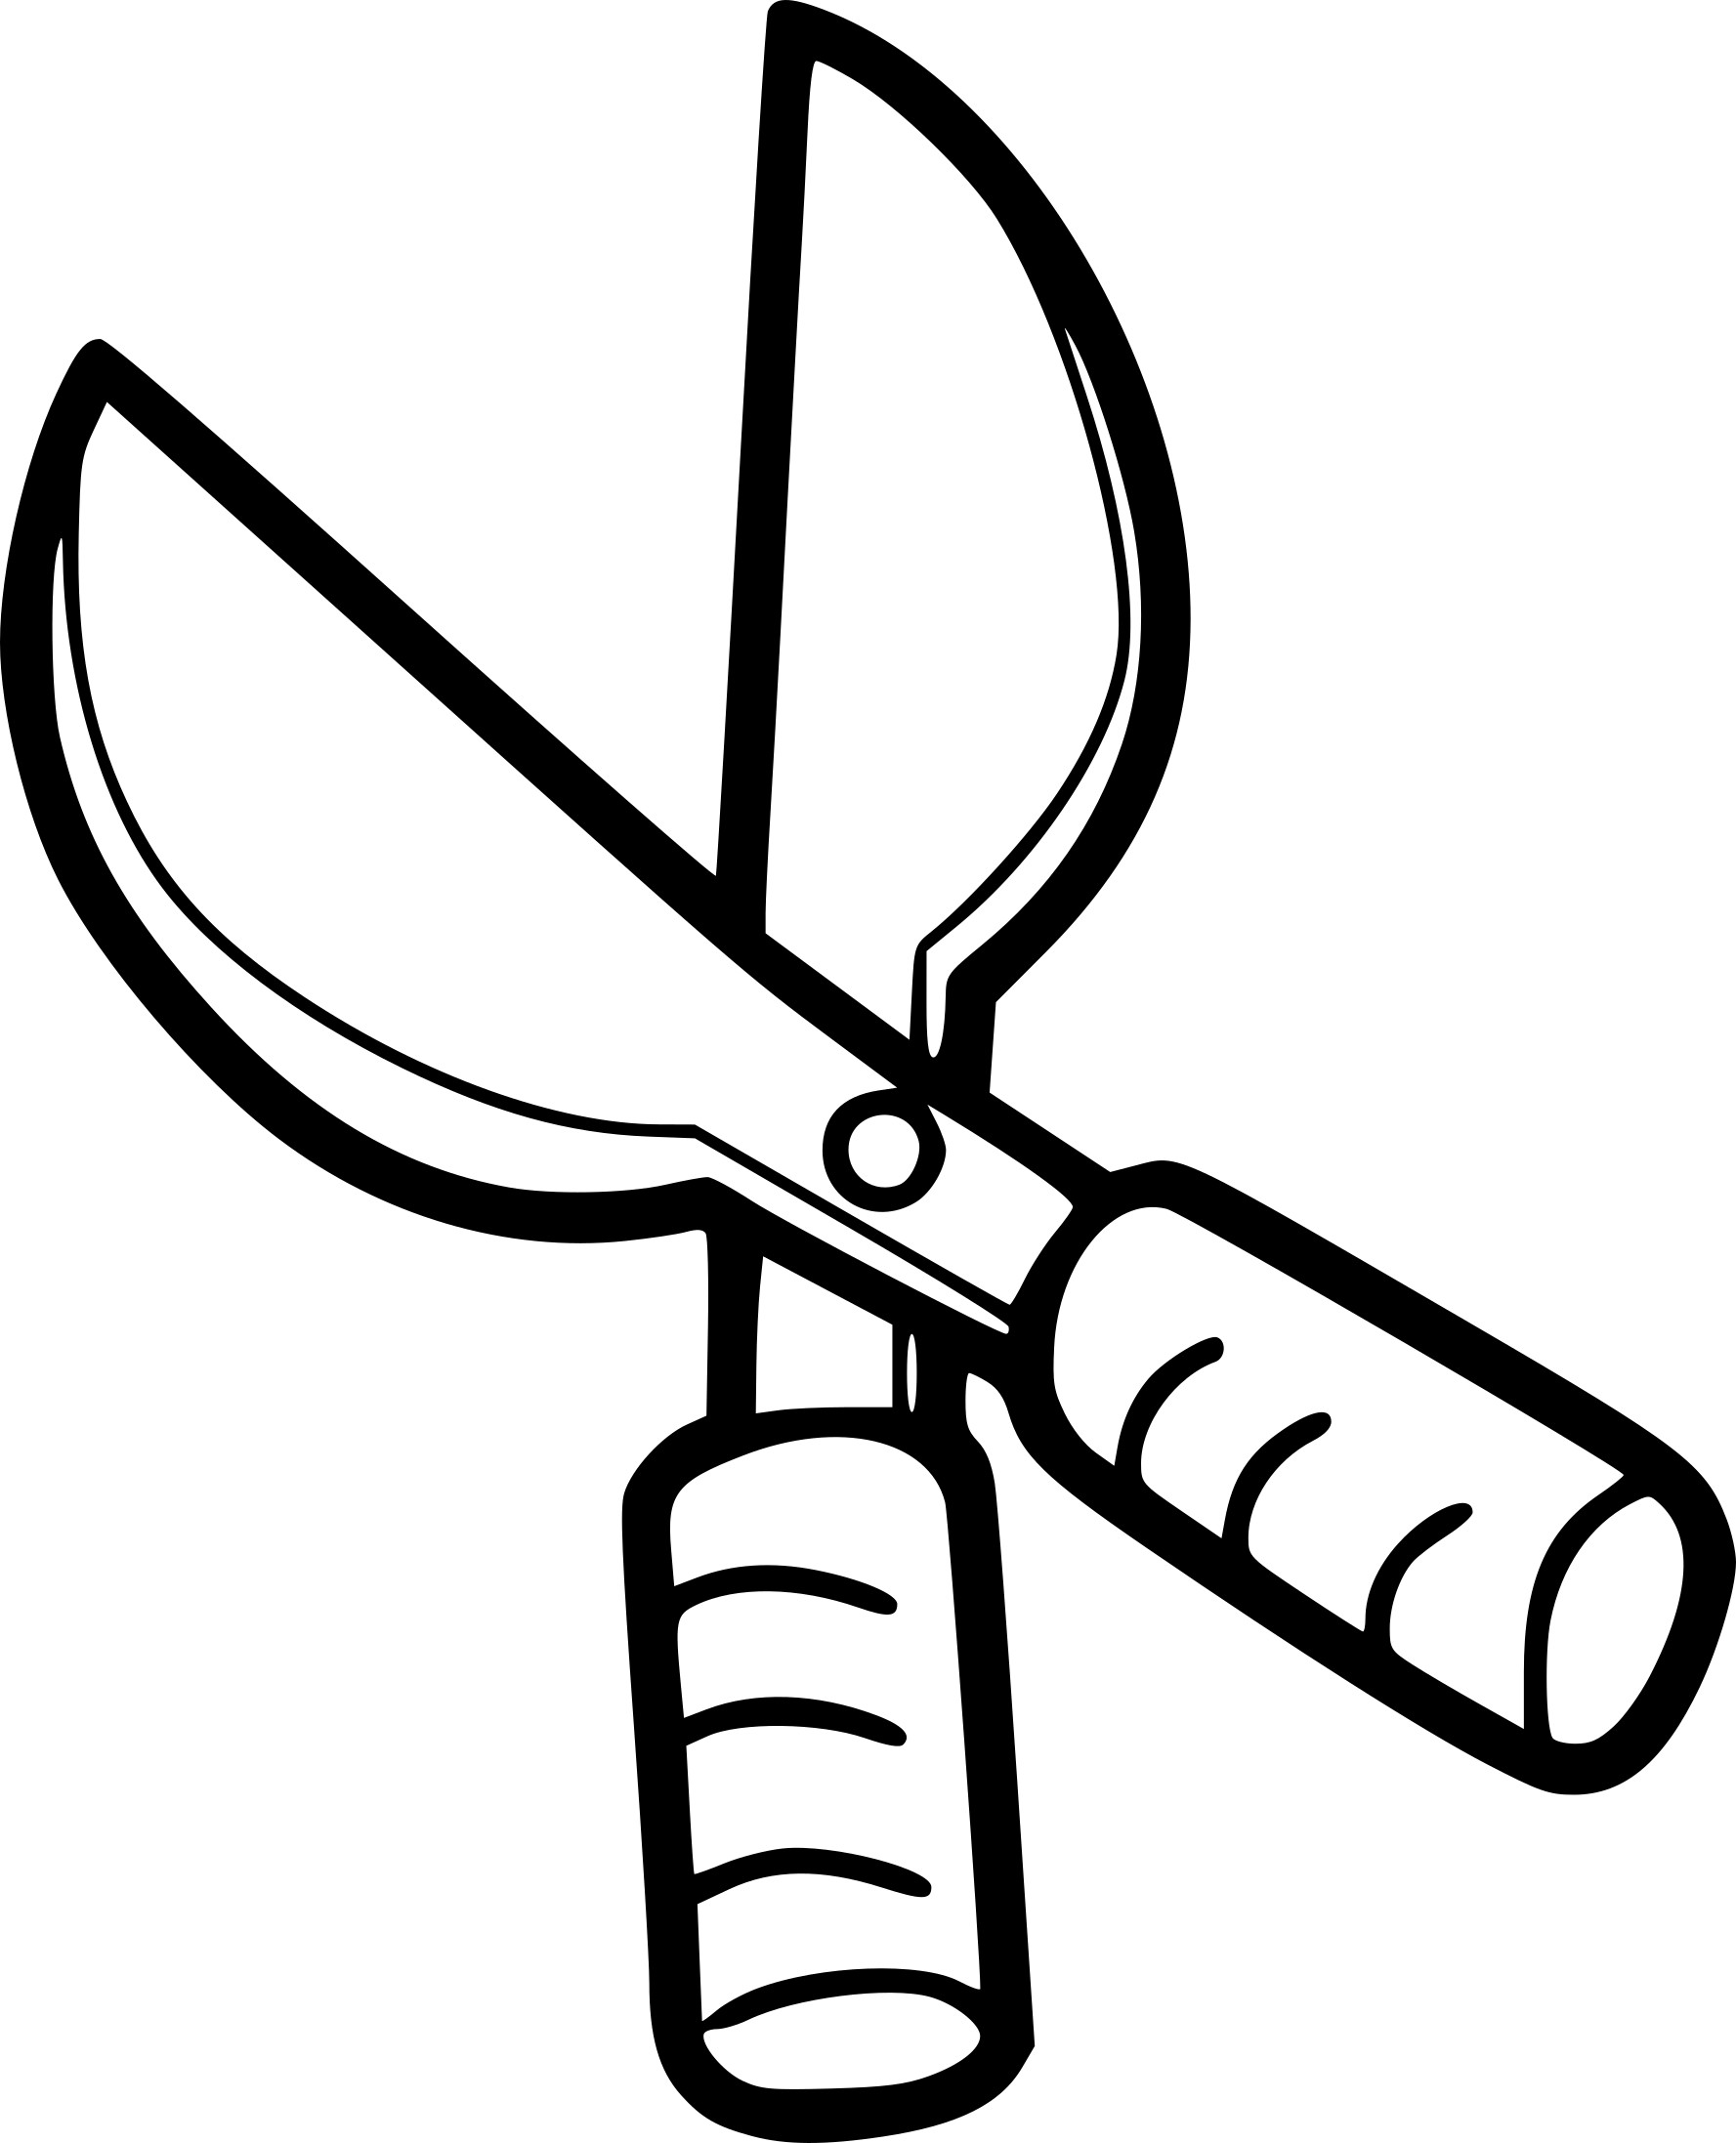 Pruning Shears coloring page